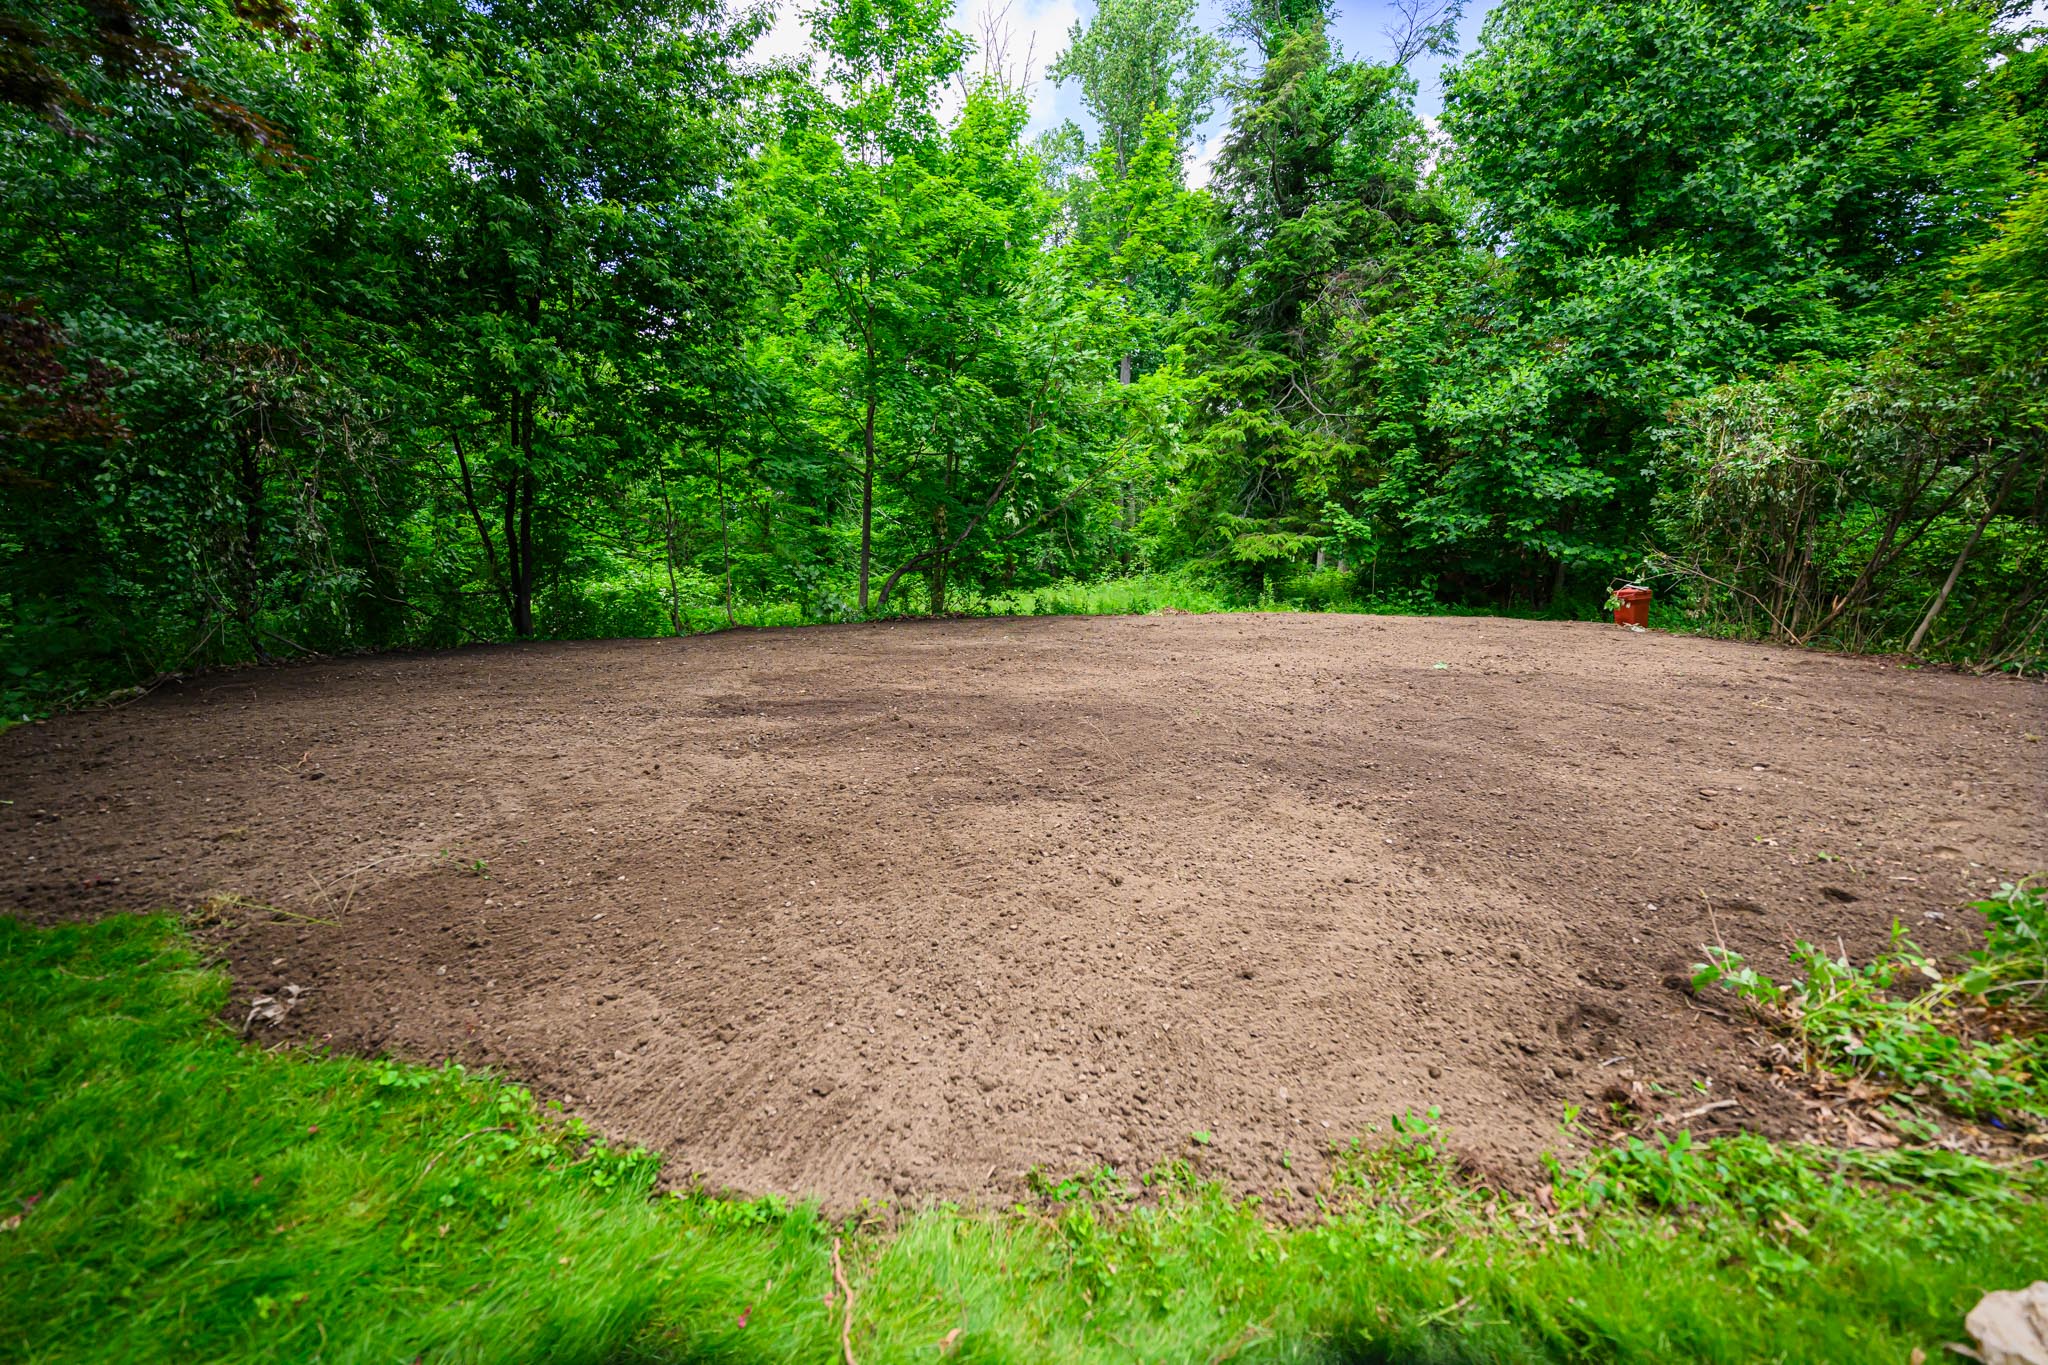 Customers backyard where pool use to be located now is filled in with topsoil and ready for landscaping.